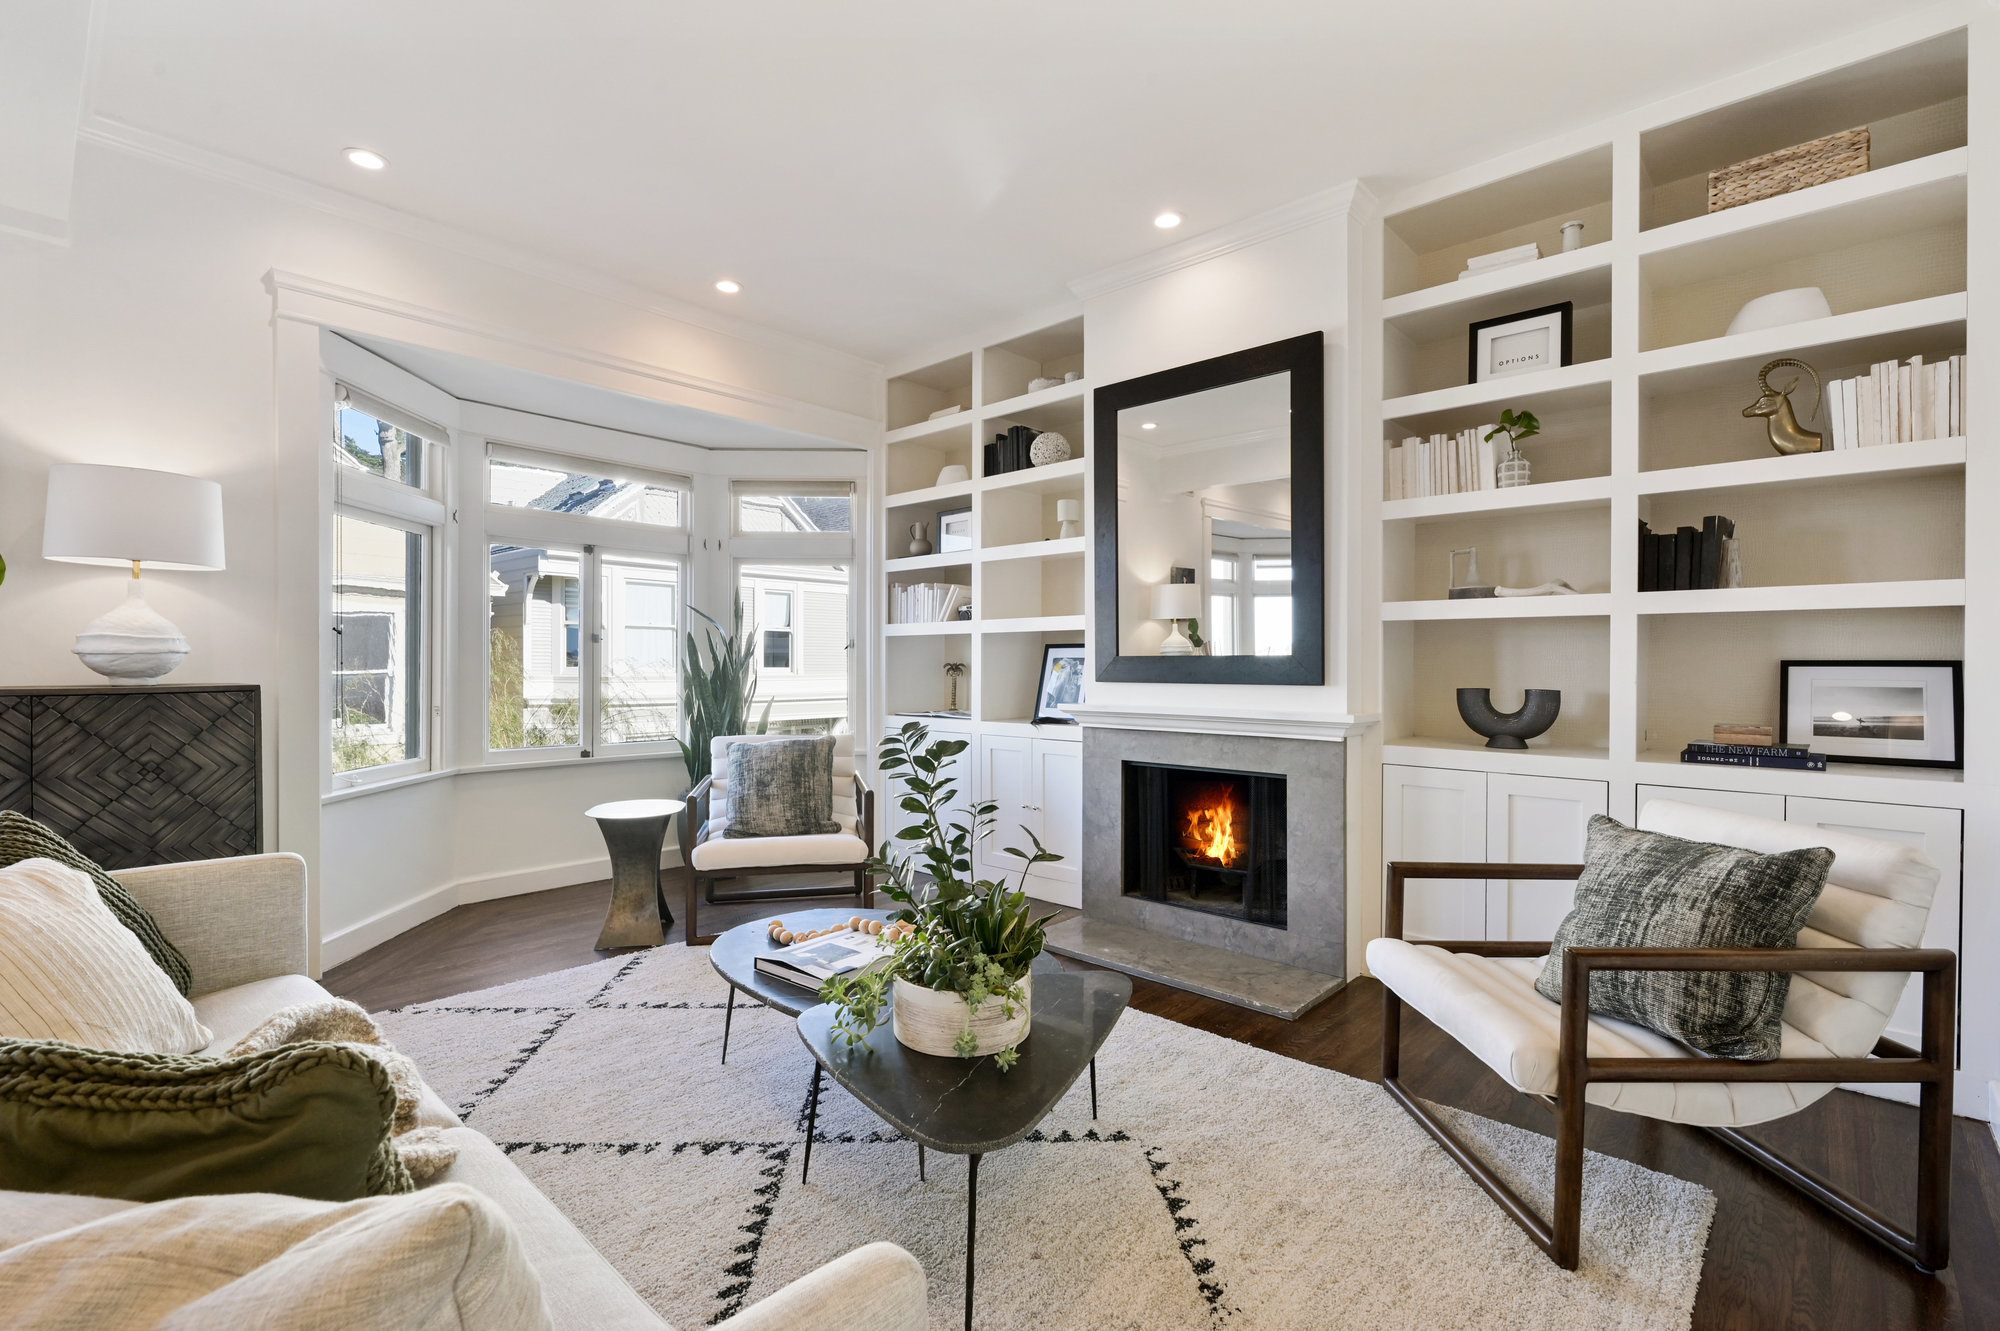 Property Photo: Living room, showing white built-in wood cabinets